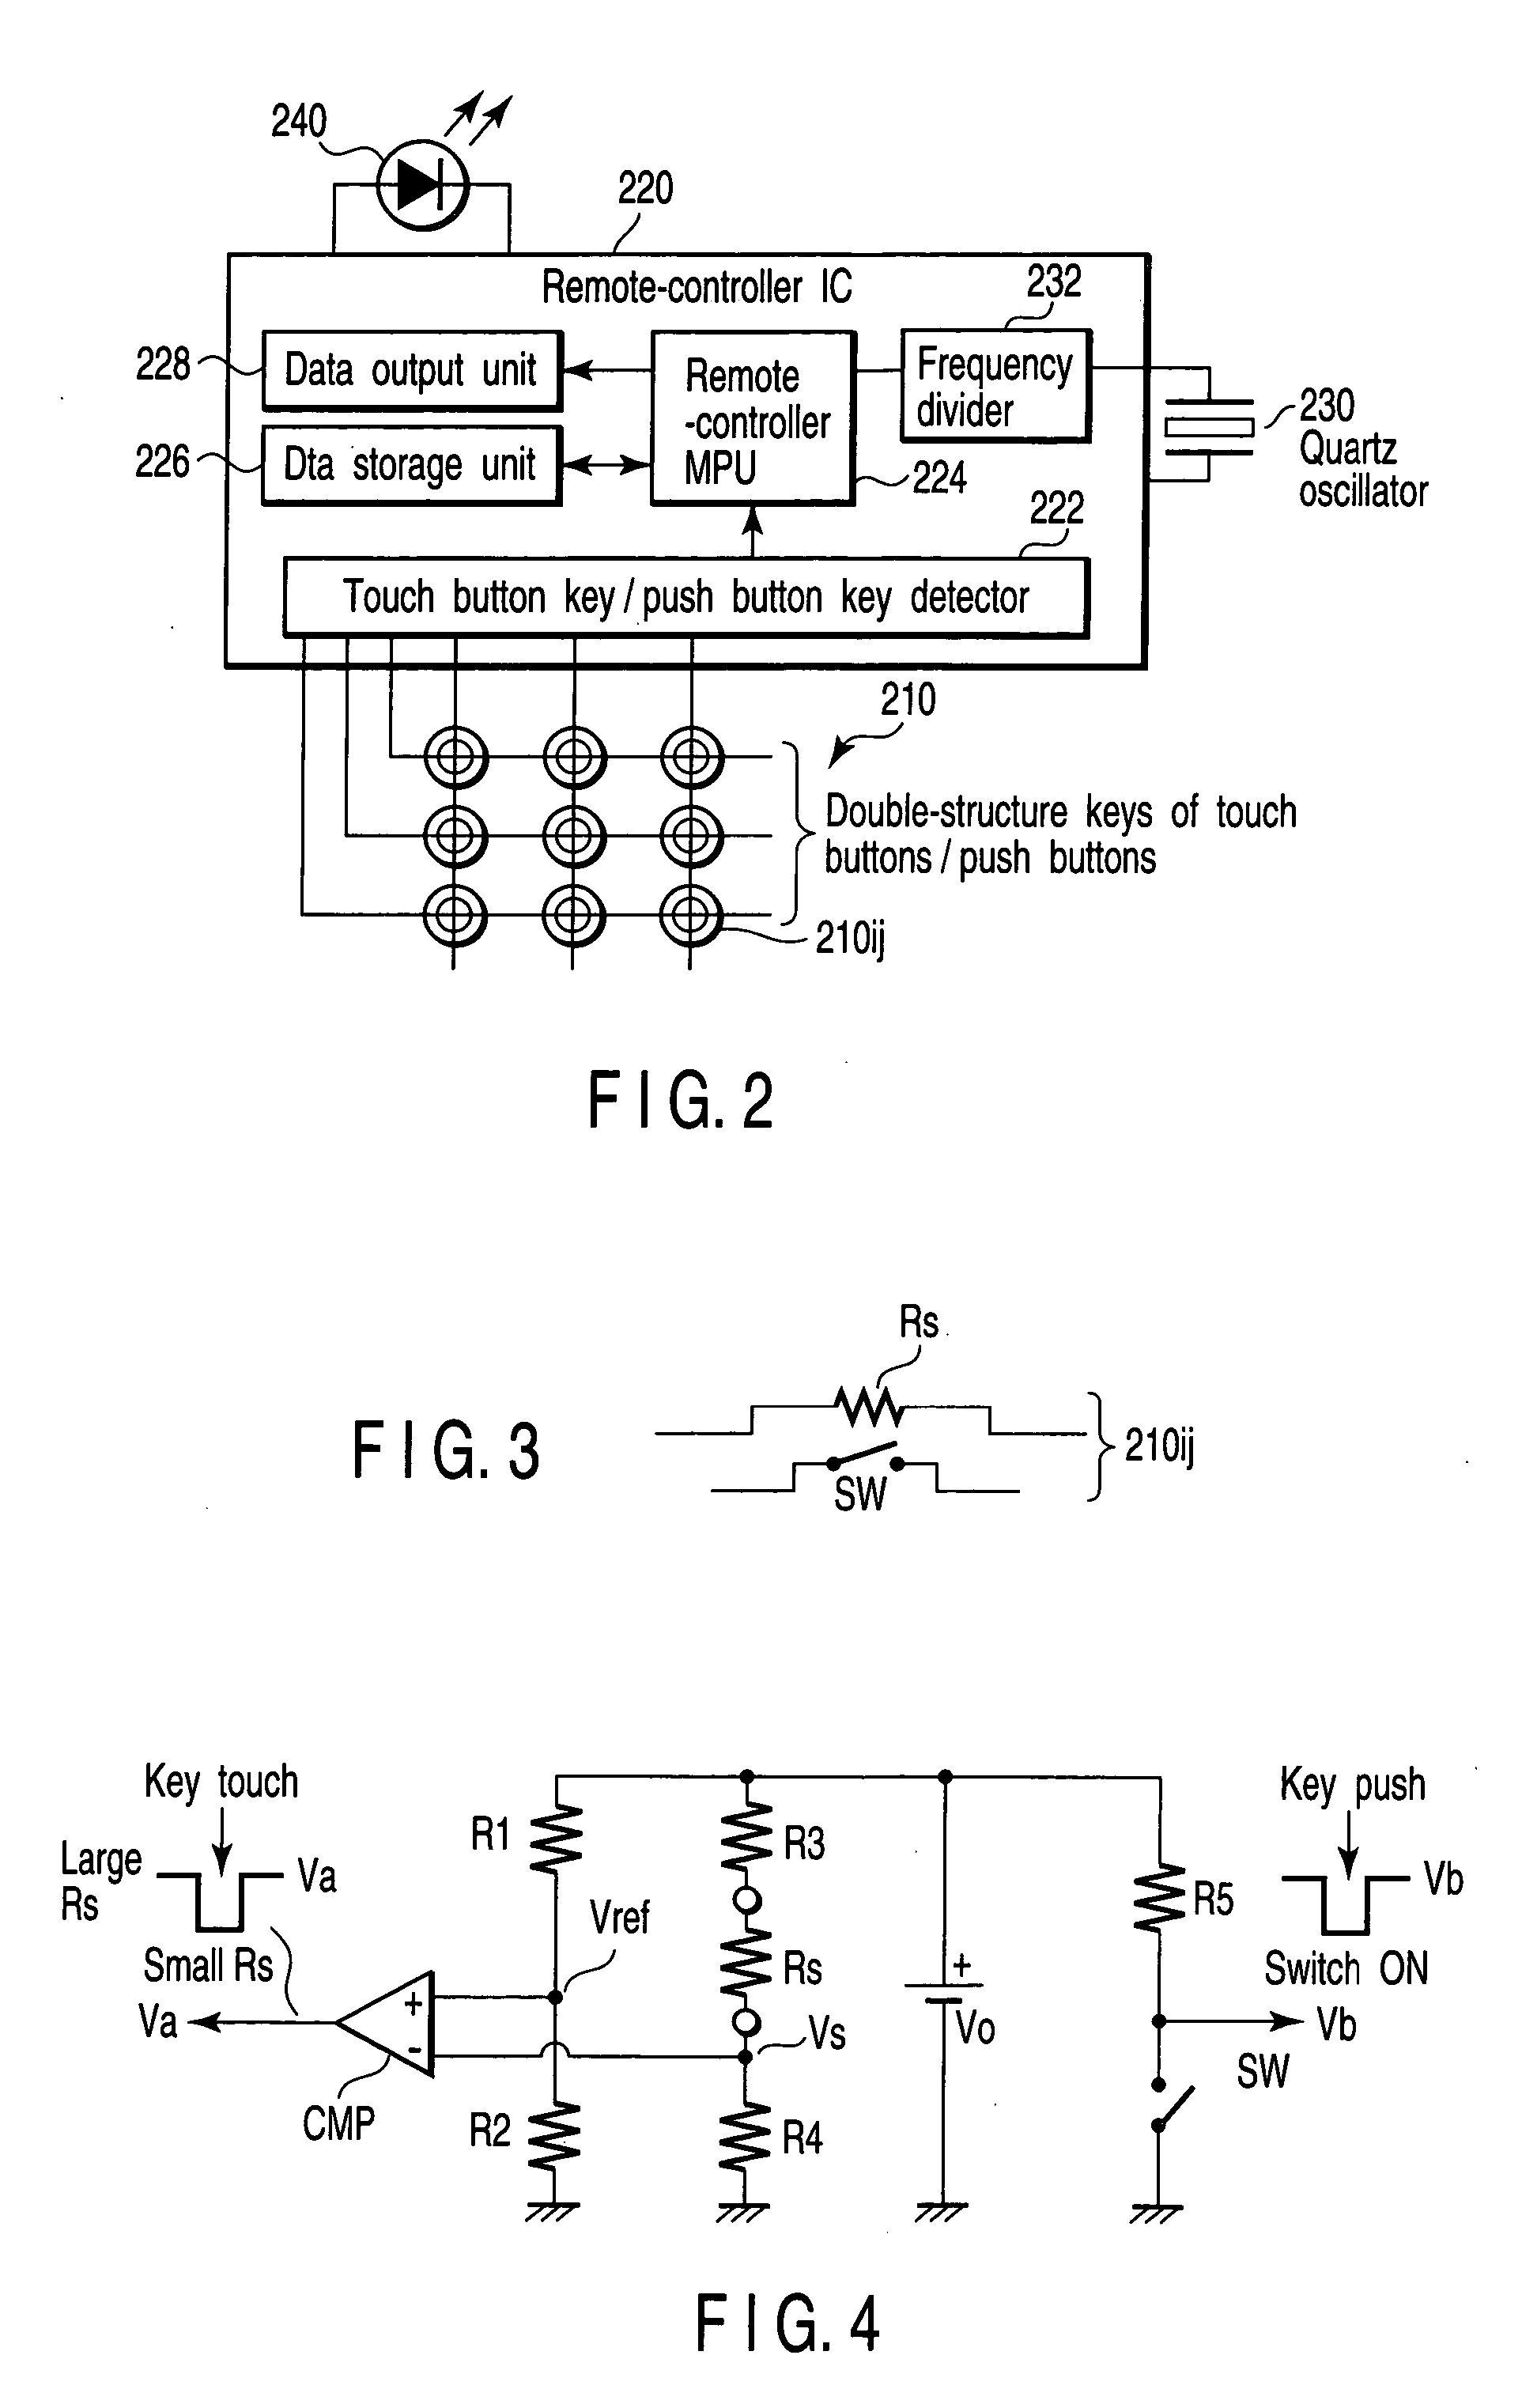 Input guide display operation system